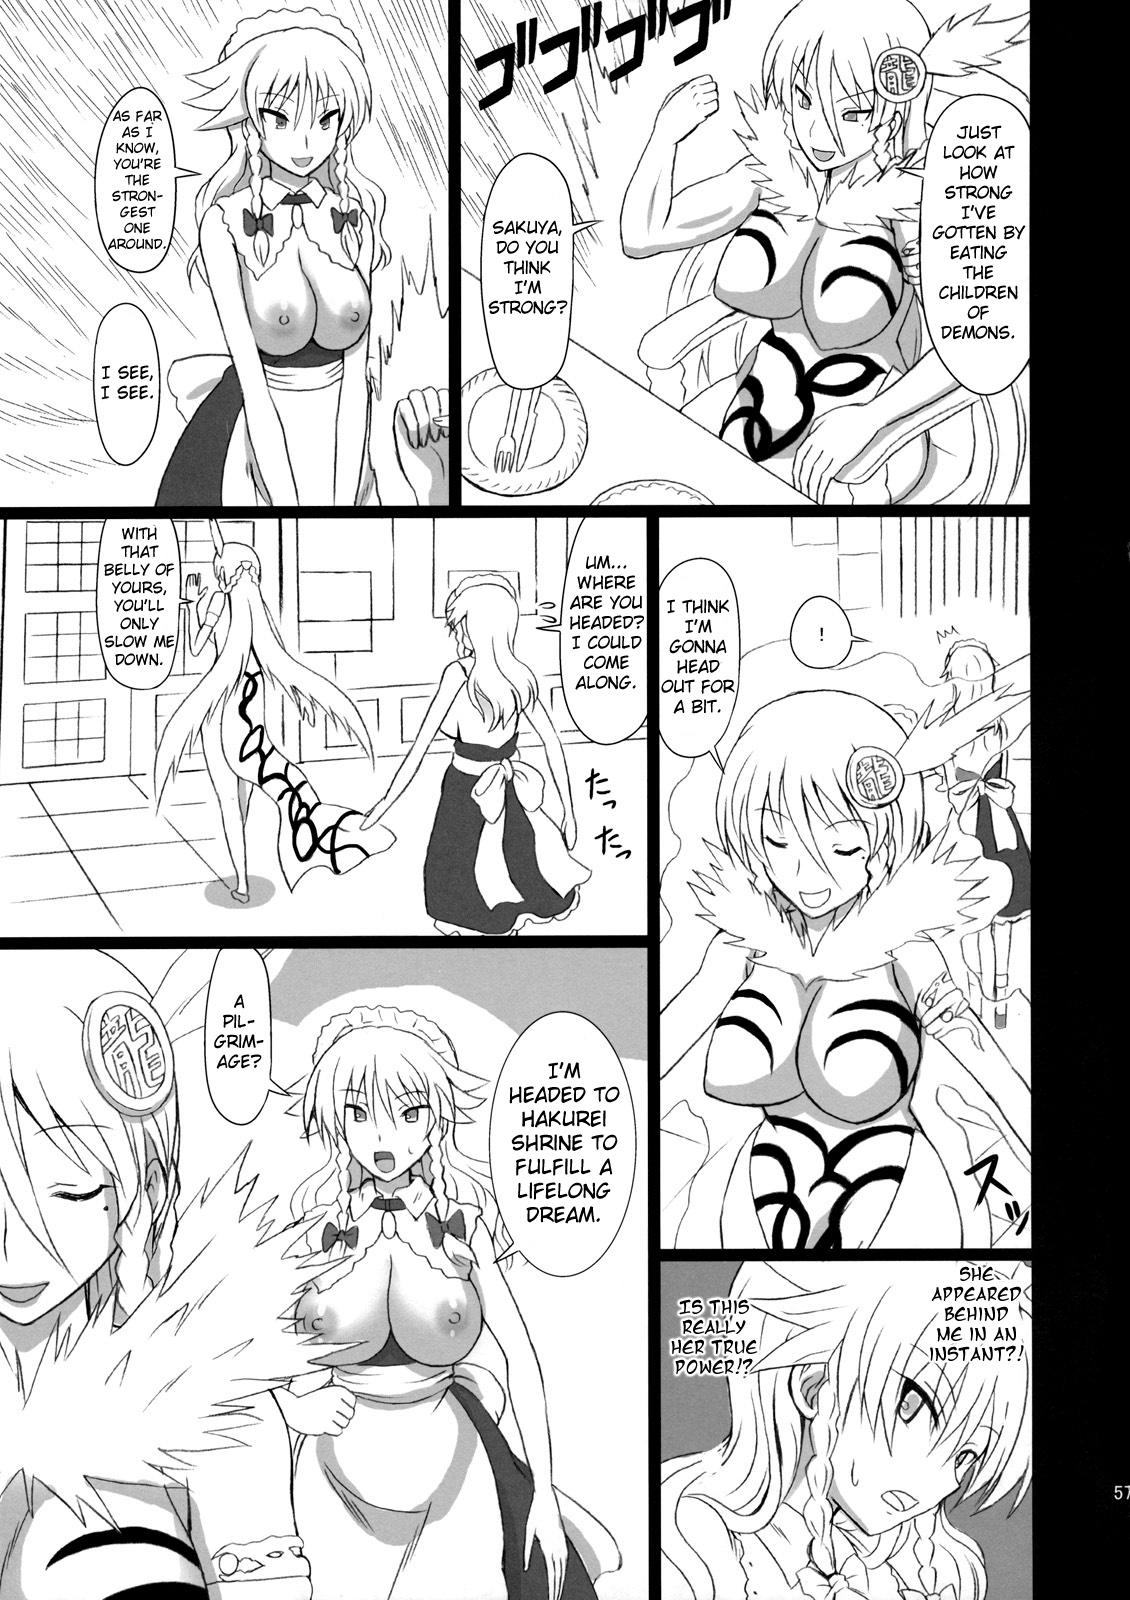 Bottom Extend Party 3 - Touhou project Femboy - Page 57